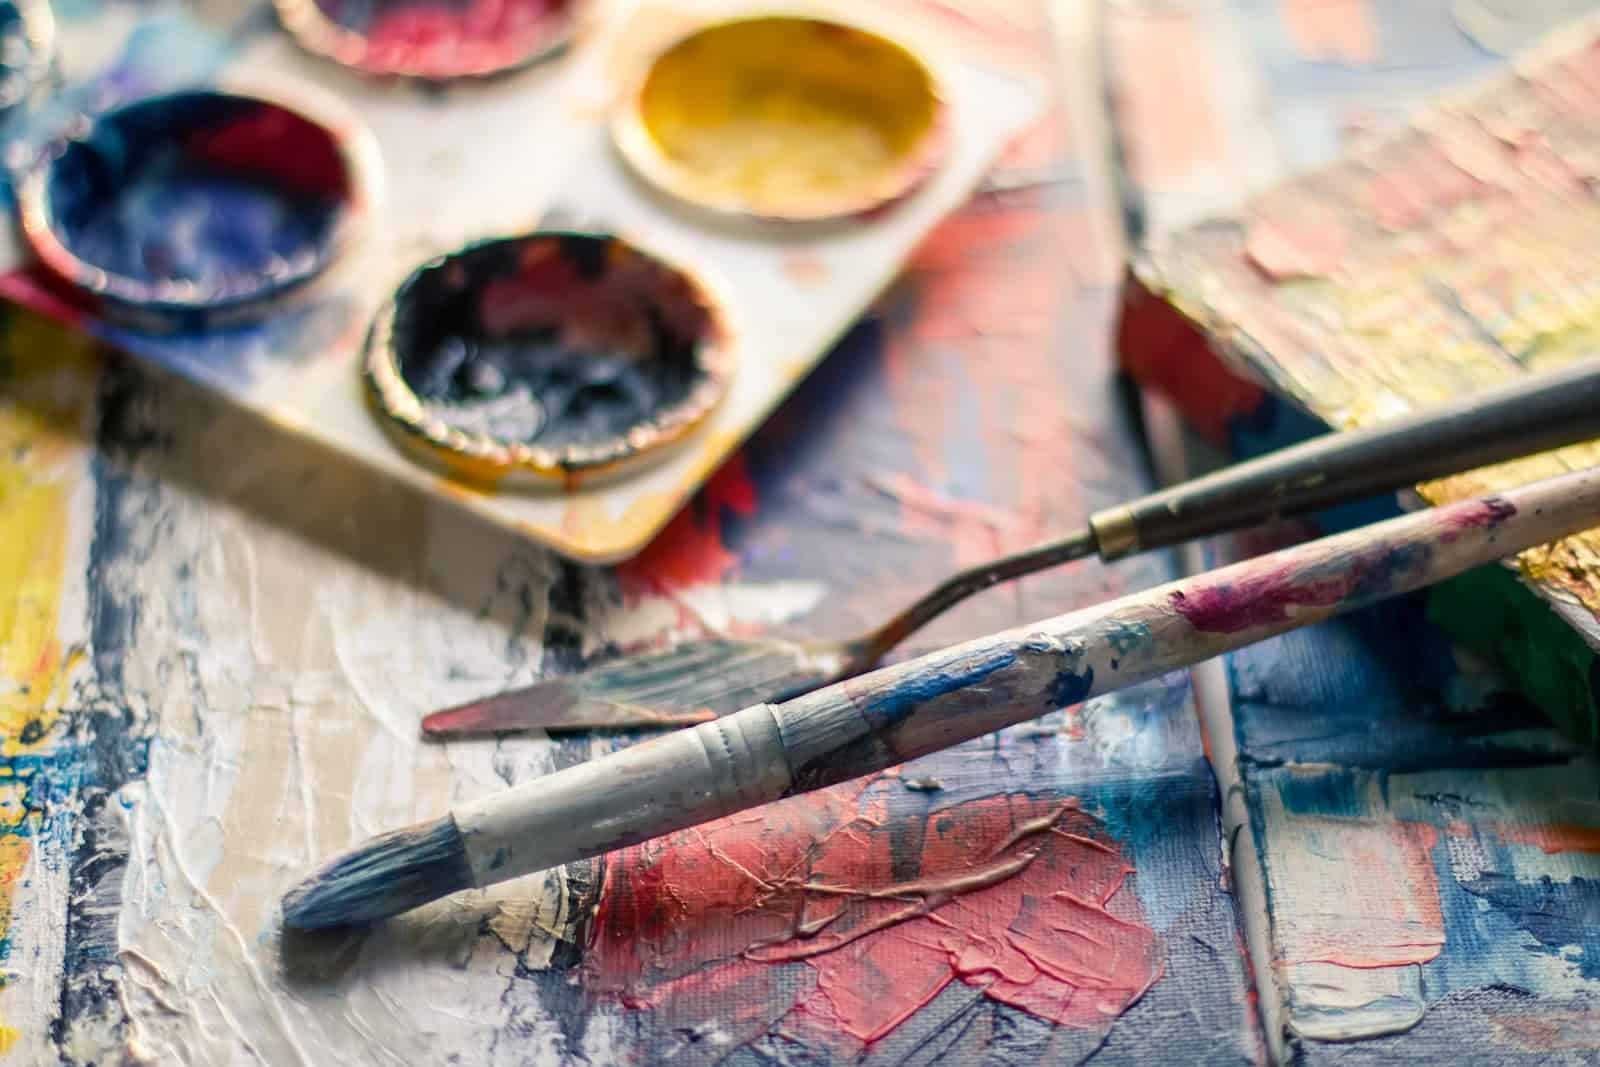 In today's fast-paced world, hobbies allow us to slow down and enjoy our time. We get to put efforts into crafting or making things that in turn make our world seem a little brighter. 